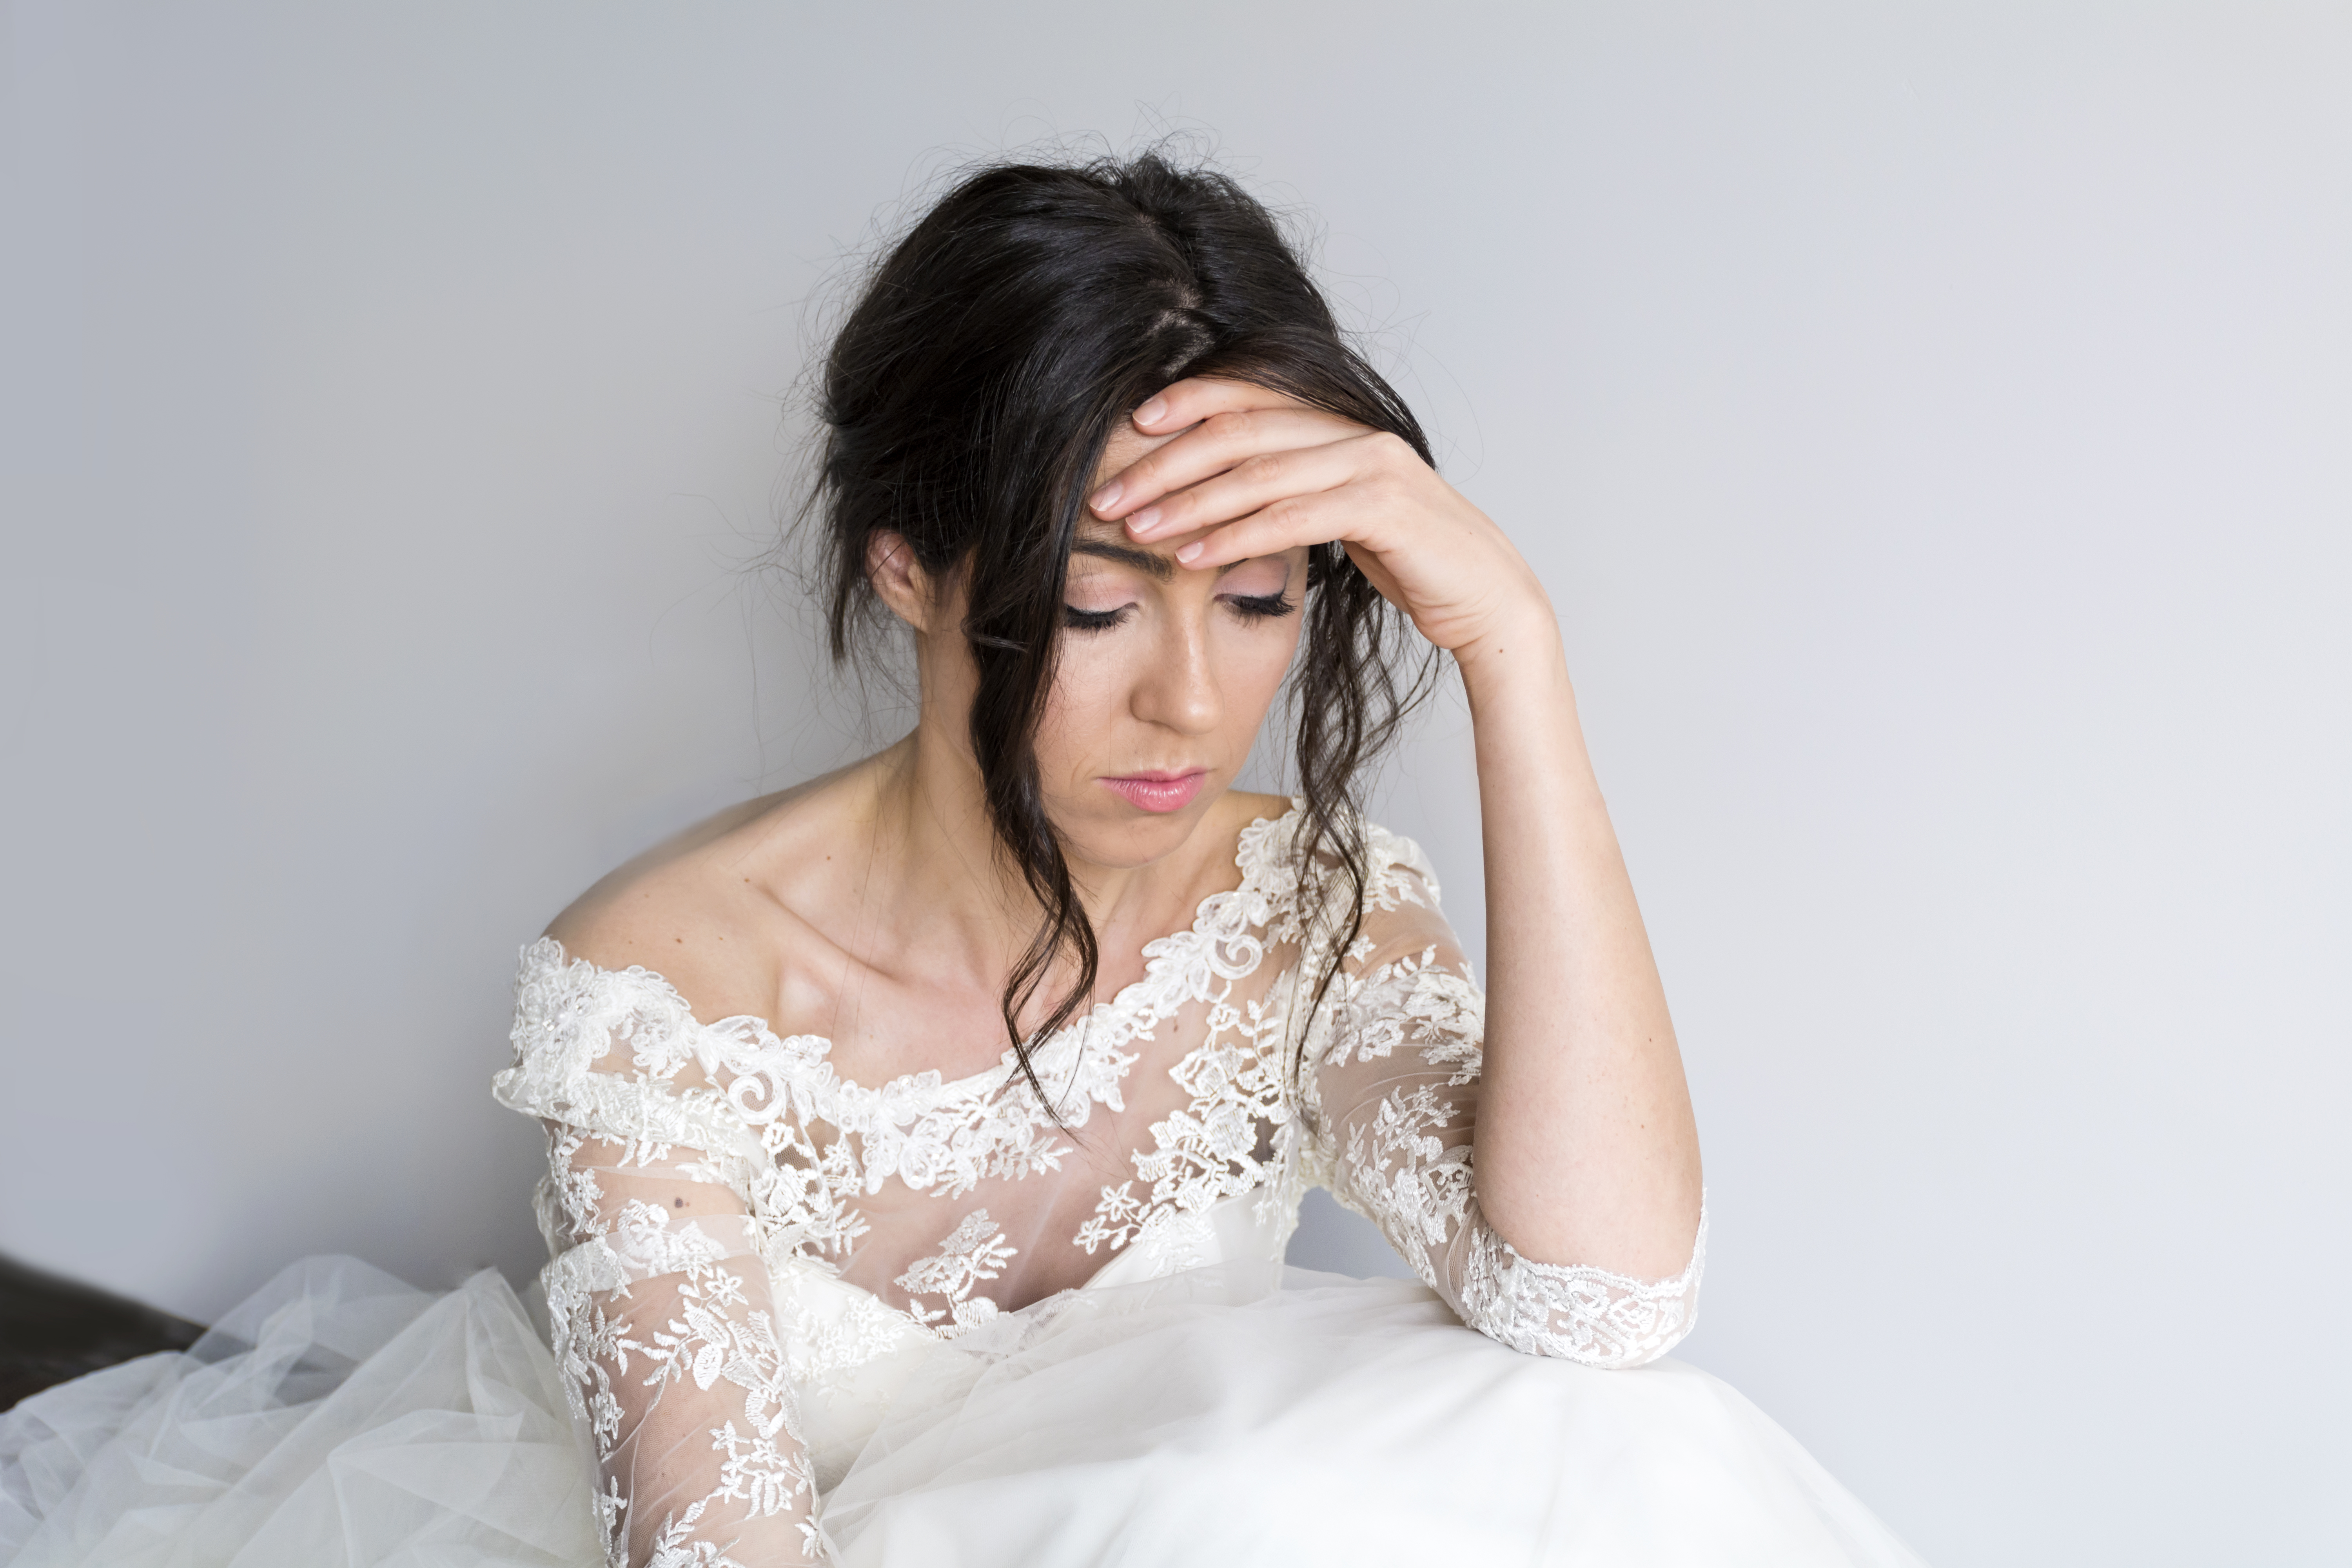 A beautiful, tired, and sad bride. | Source: Getty Images